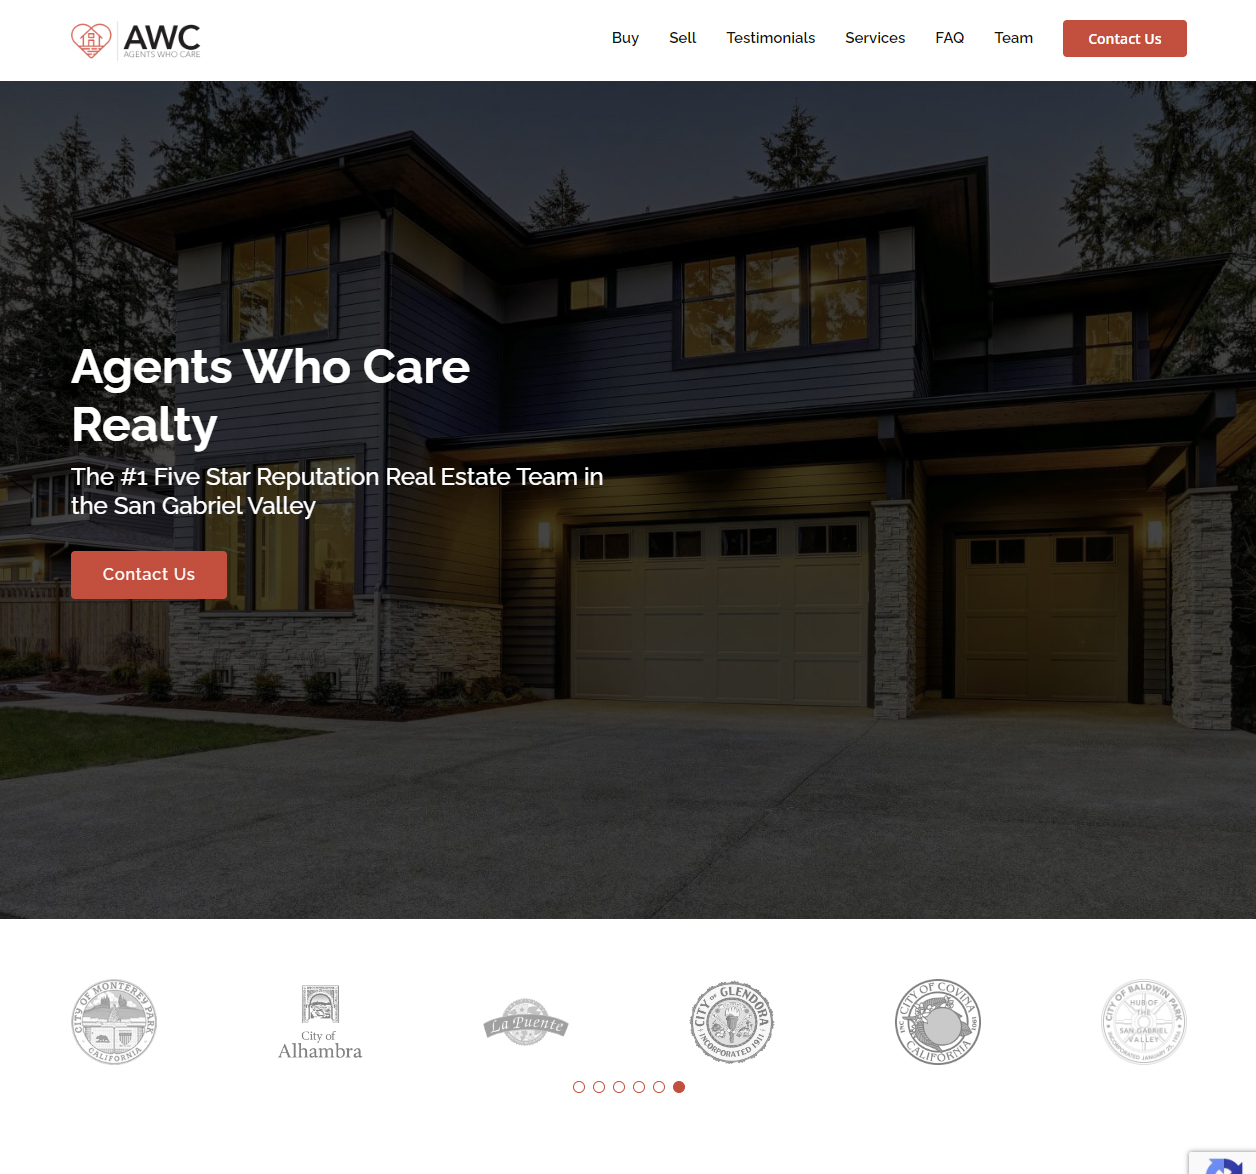 Agents Who Care Realty Website